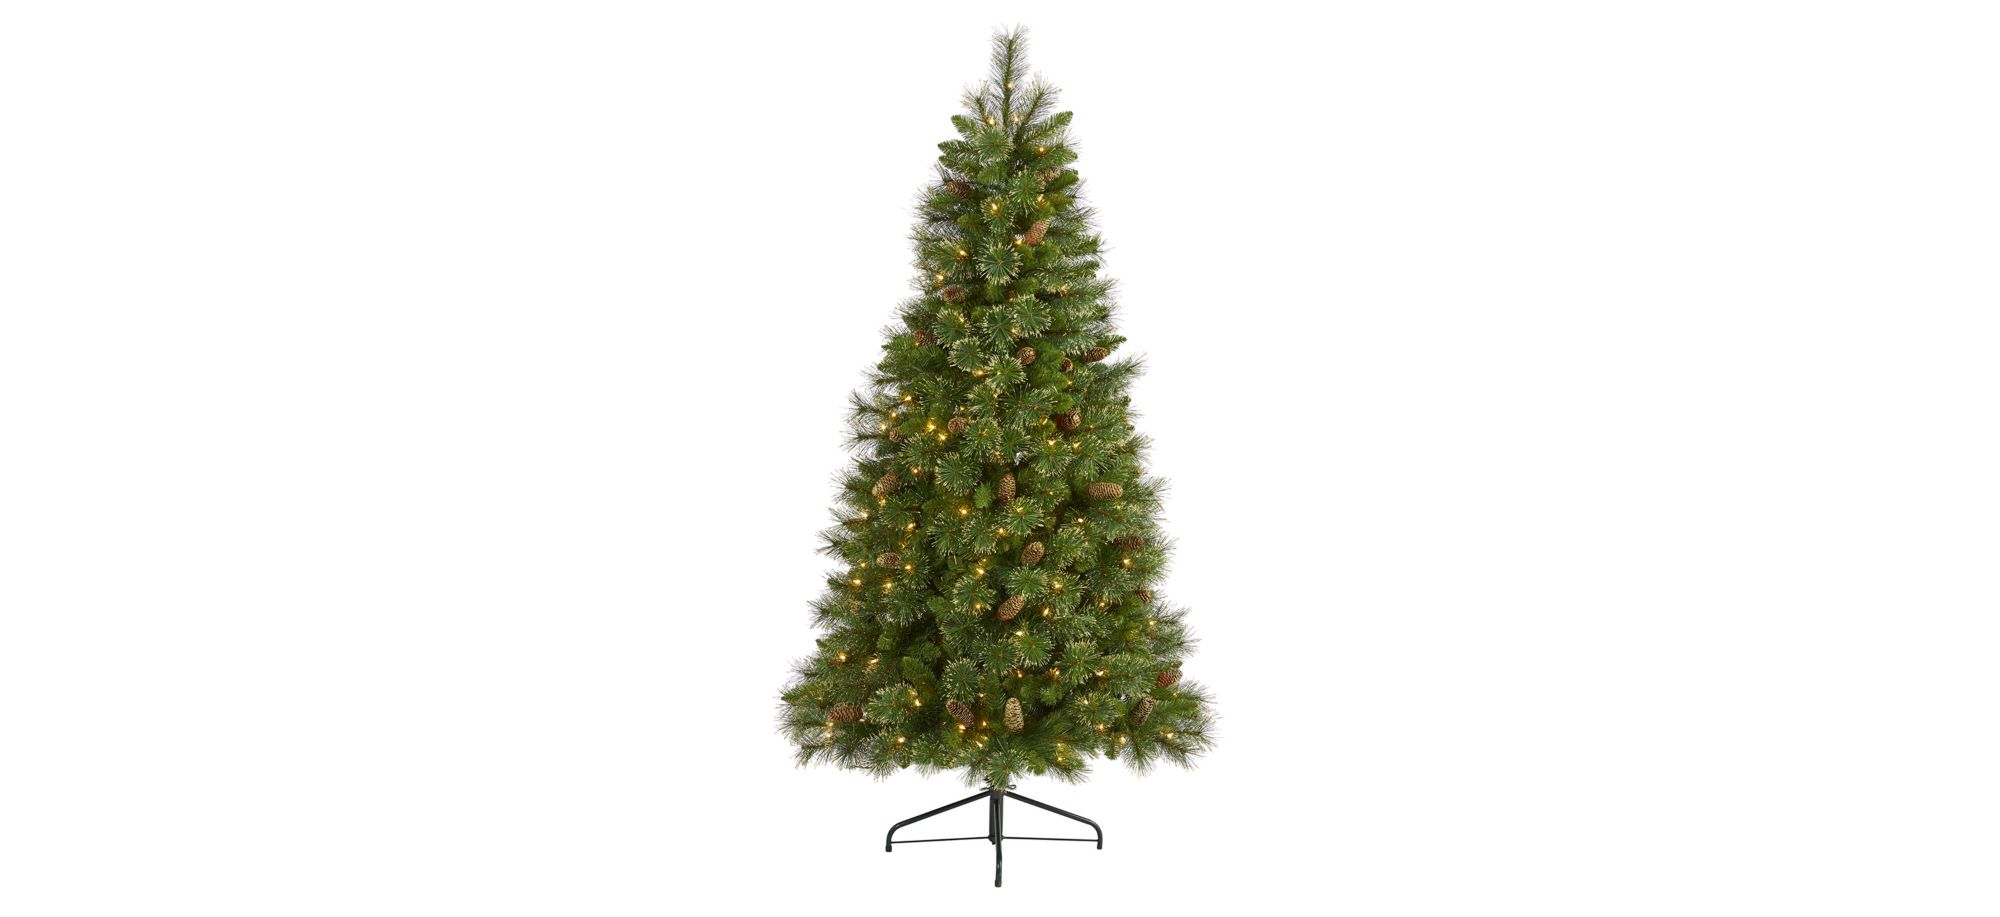 6ft. Pre-Lit Golden Tip Washington Pine Artificial Christmas Tree in Green by Bellanest